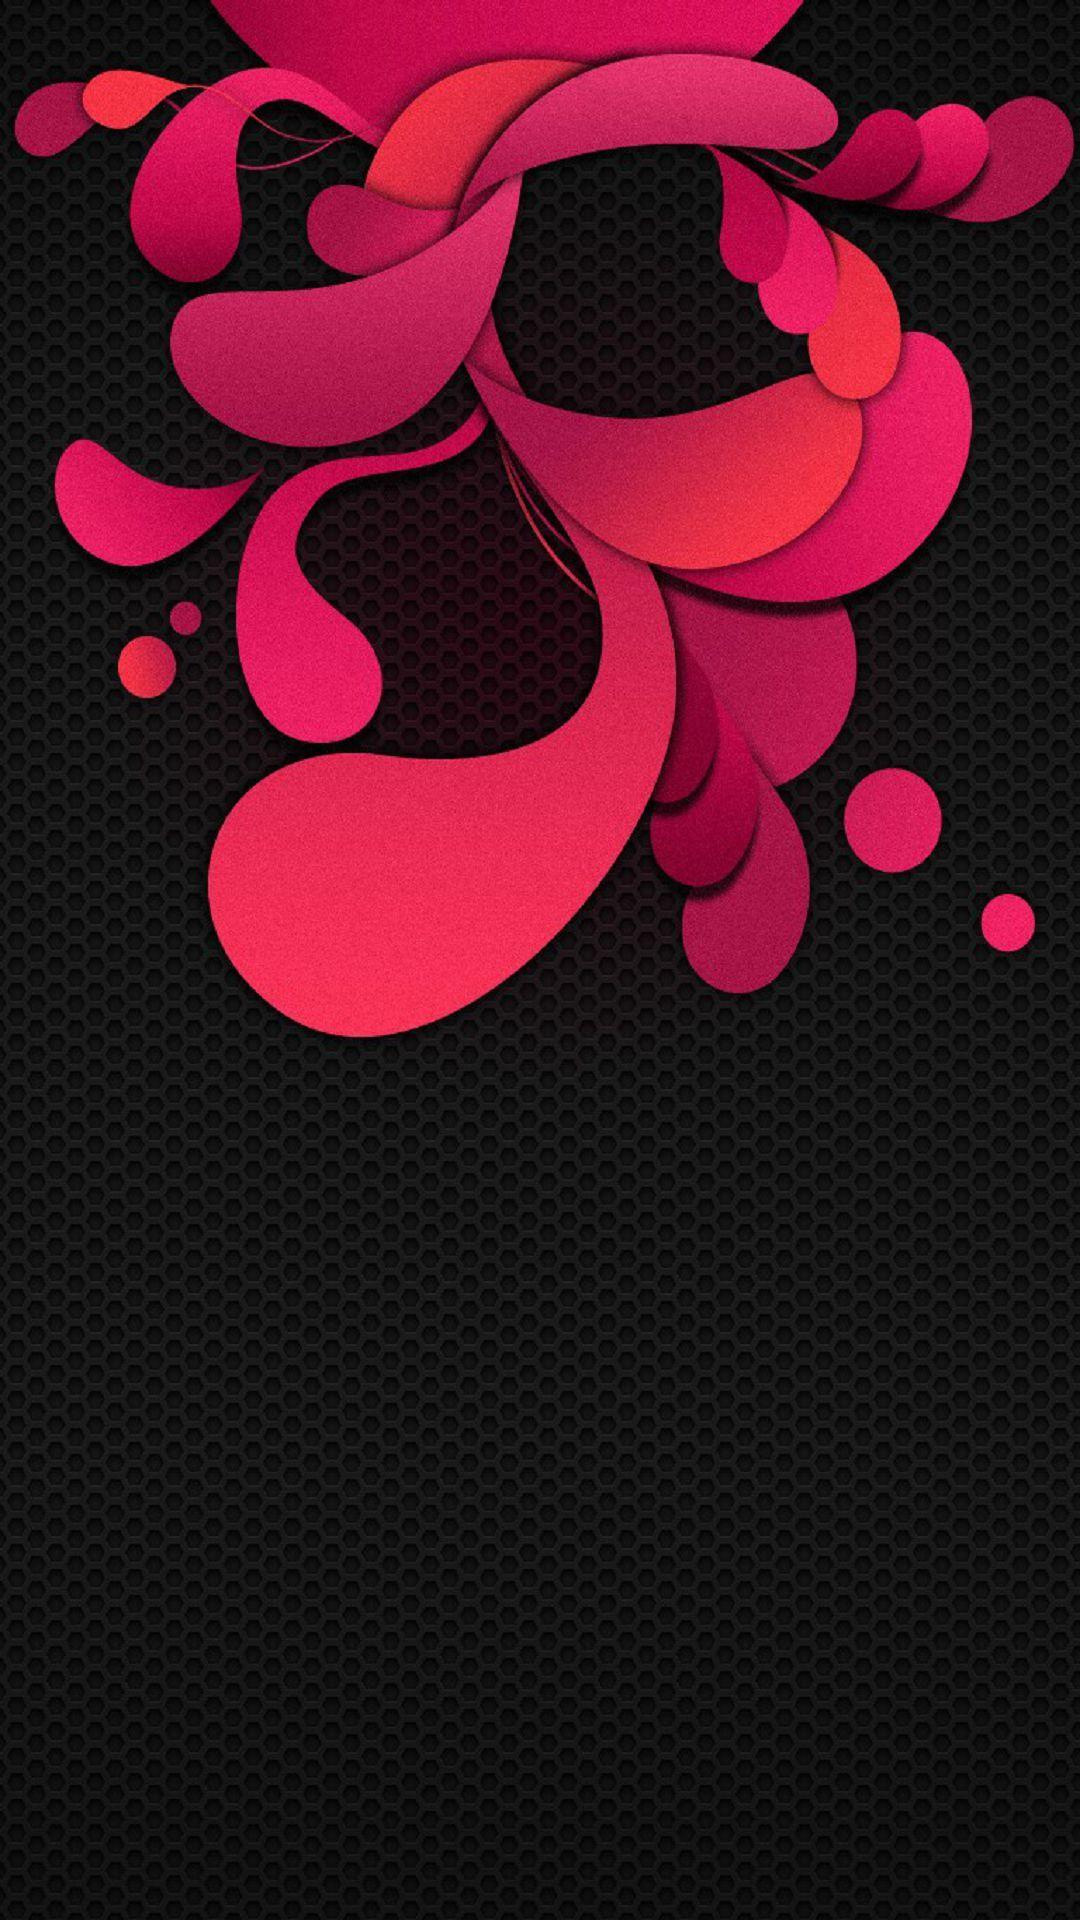 Pink Flourish htc one wallpaper, free and easy to download